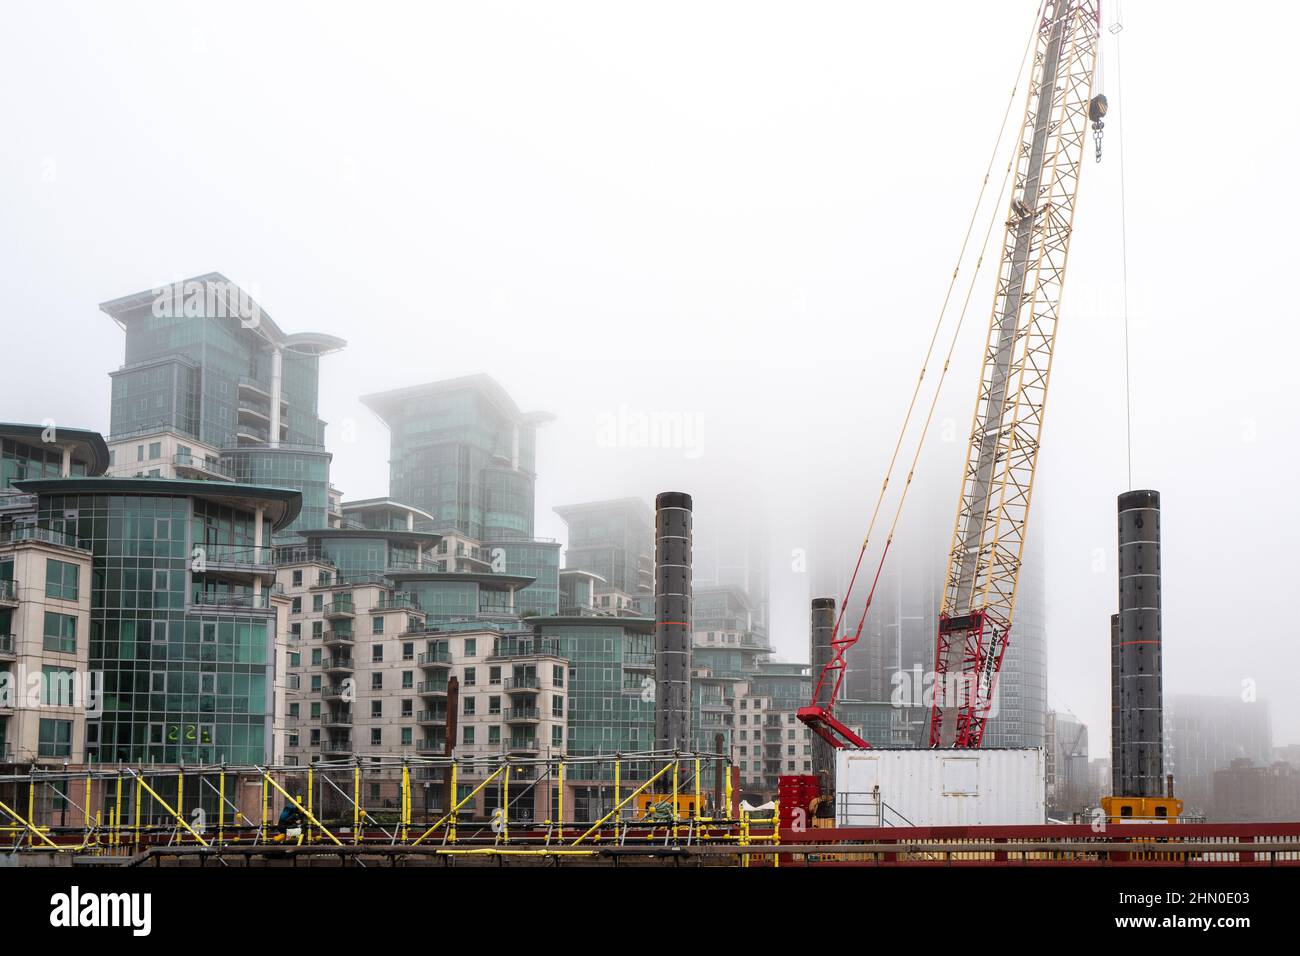 Waterfront development on the River Thames. Images taken from Vauxhall Bridge on a very damp and misty morning. Stock Photo